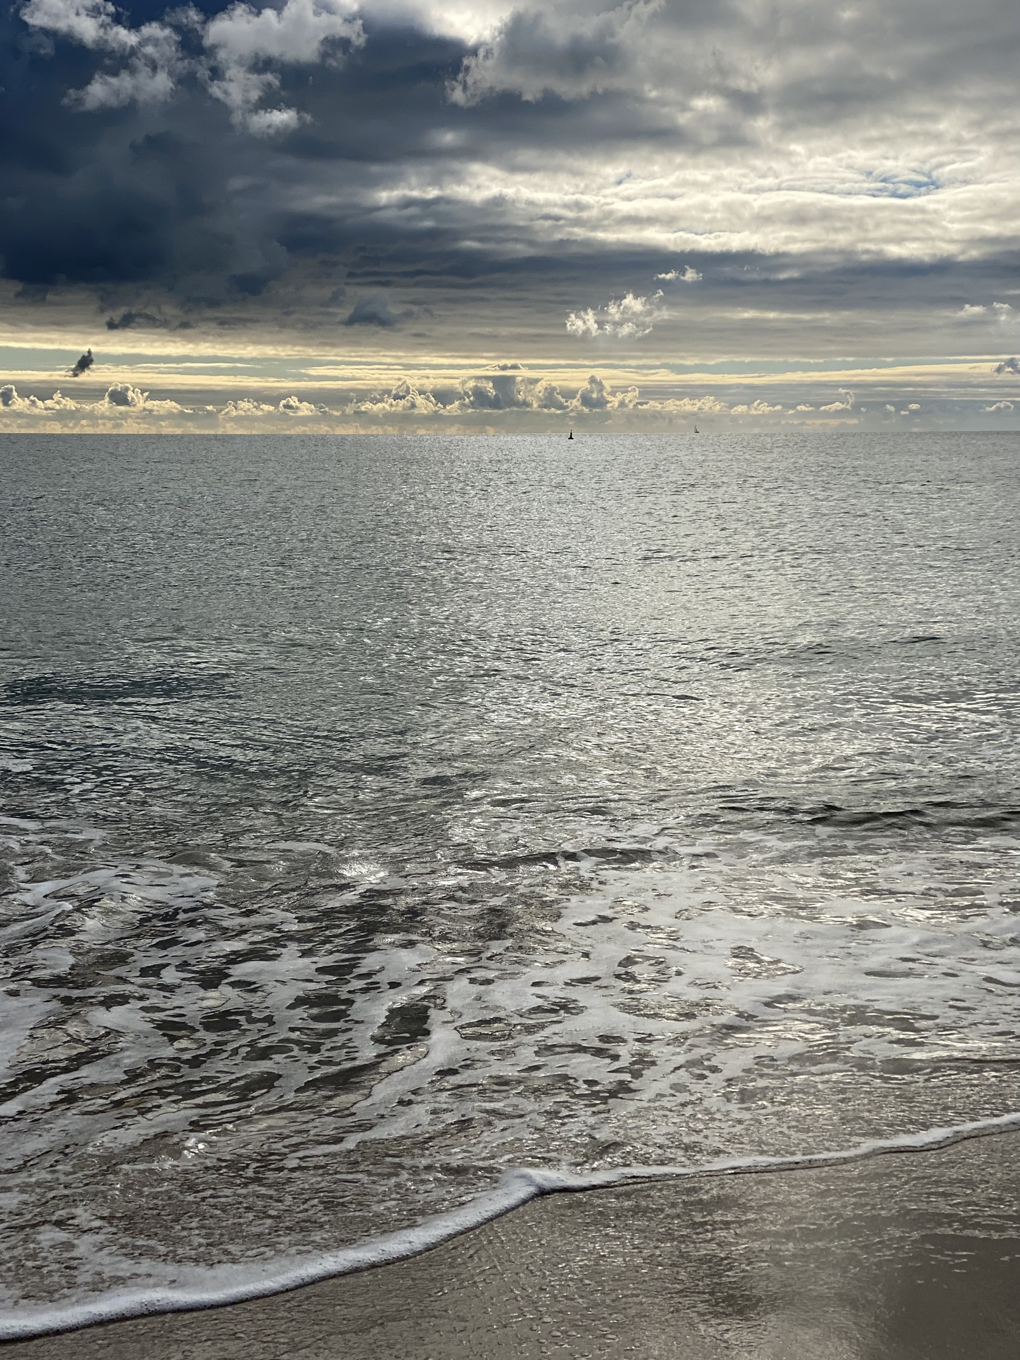 A view of the sea with the beach in the foreground and dramatic clouds in the background